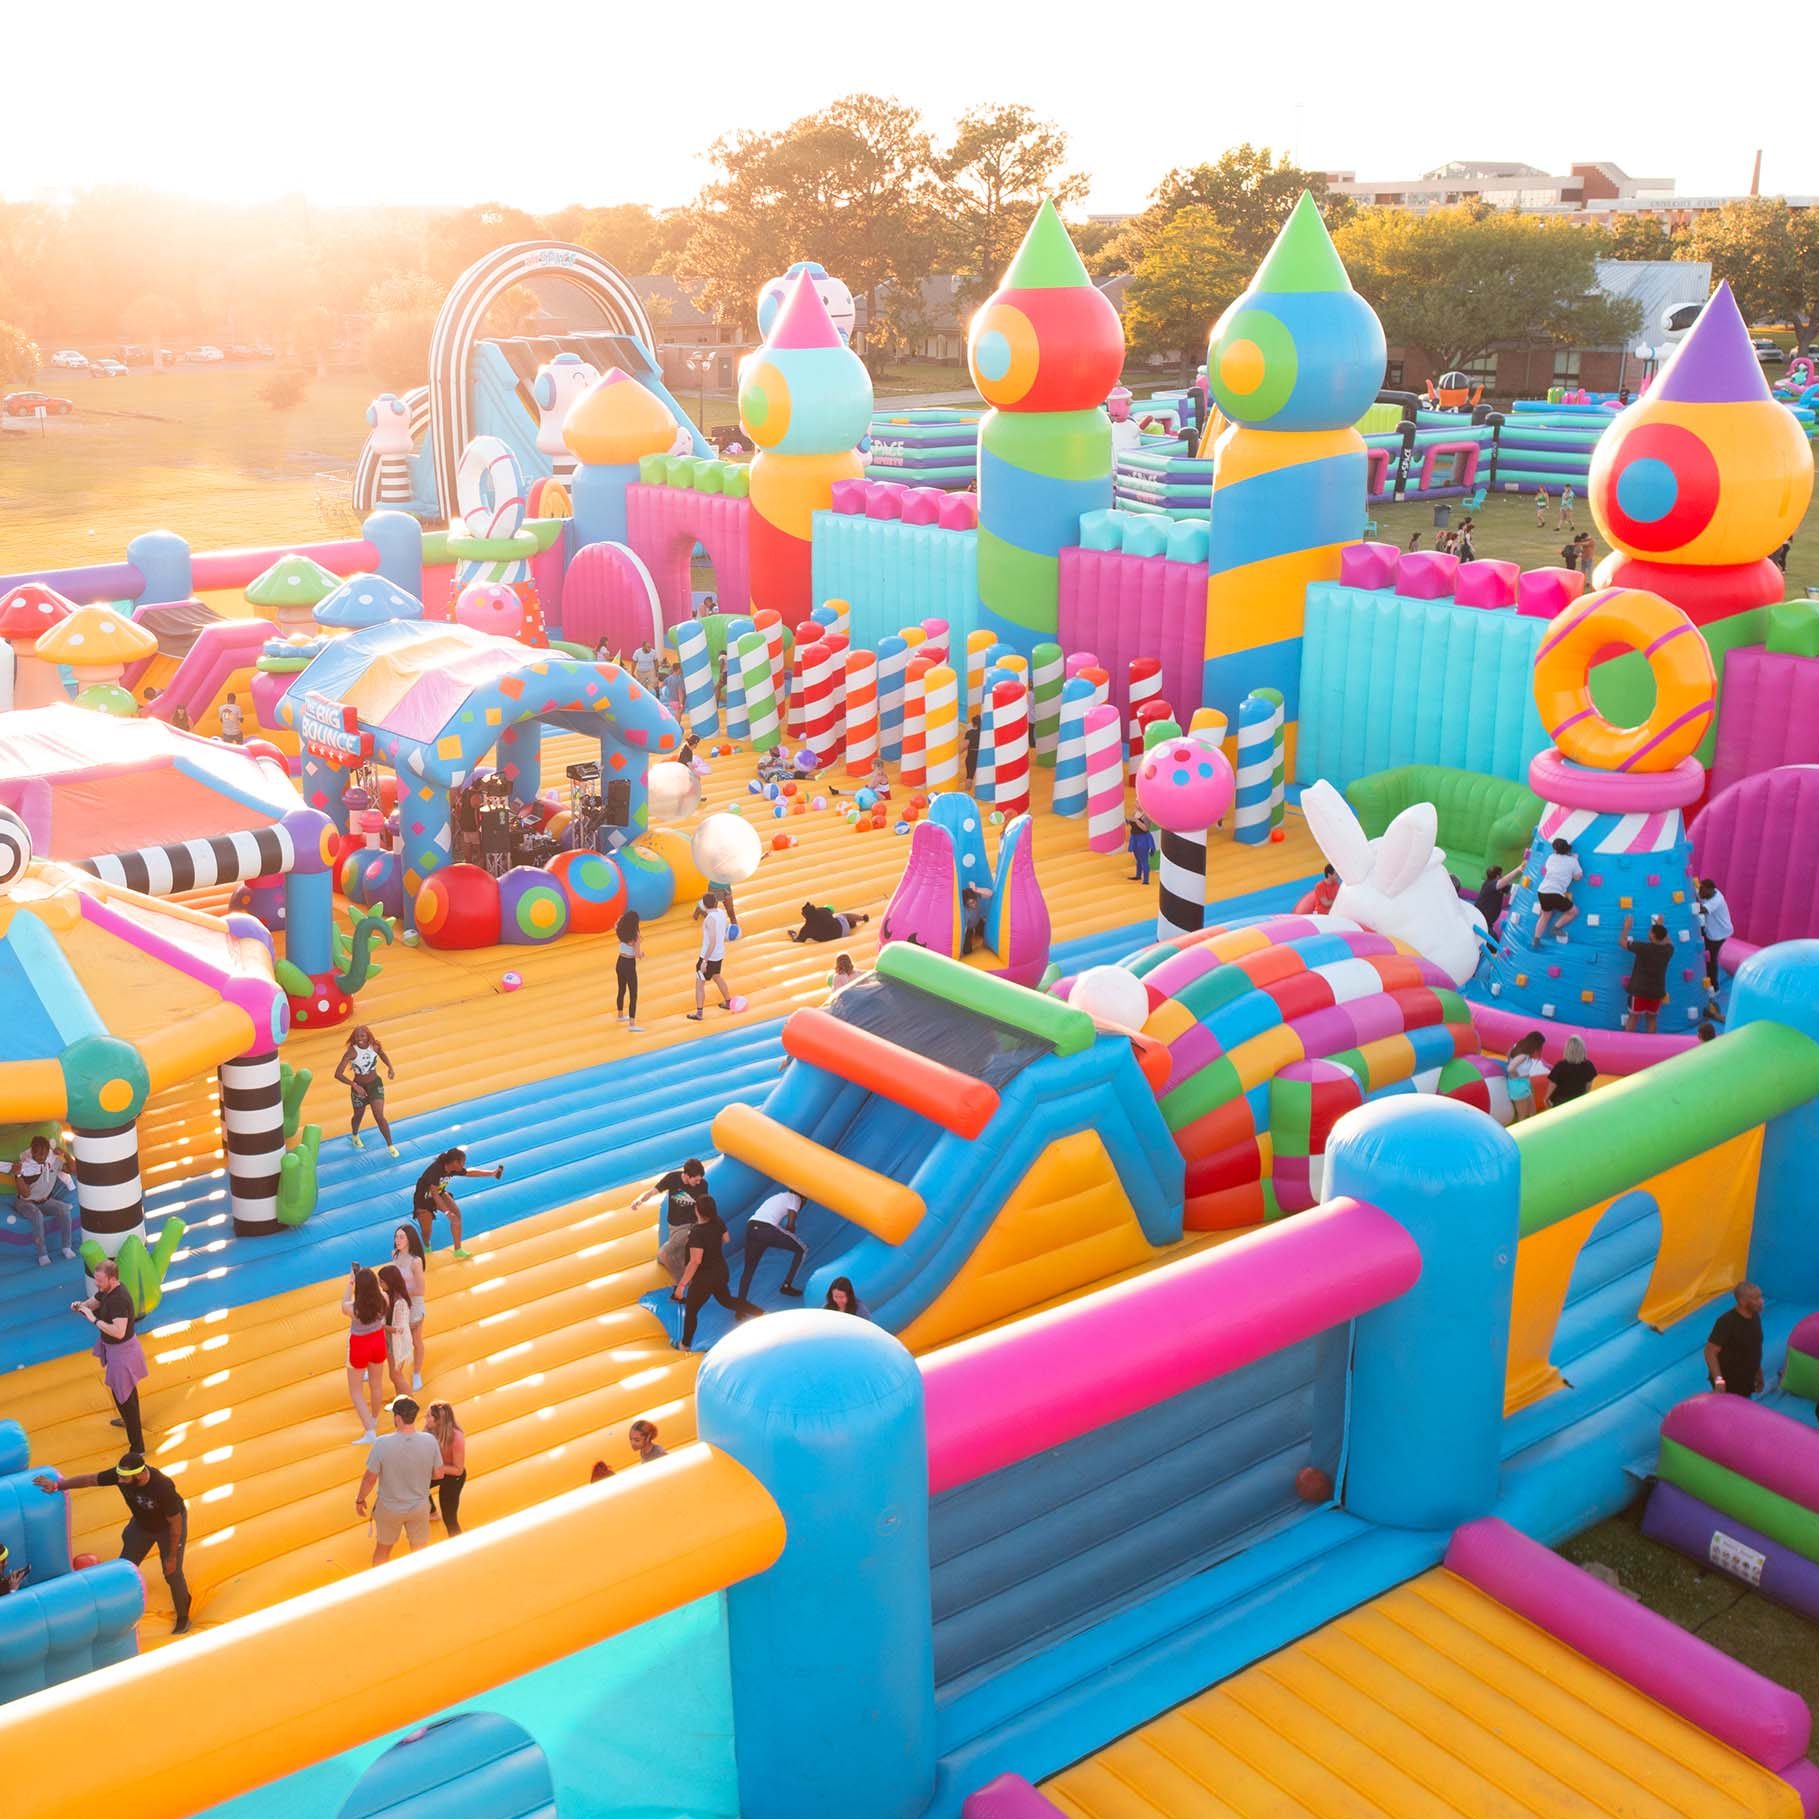 The Big Bounce America - The World's Biggest Bounce House!